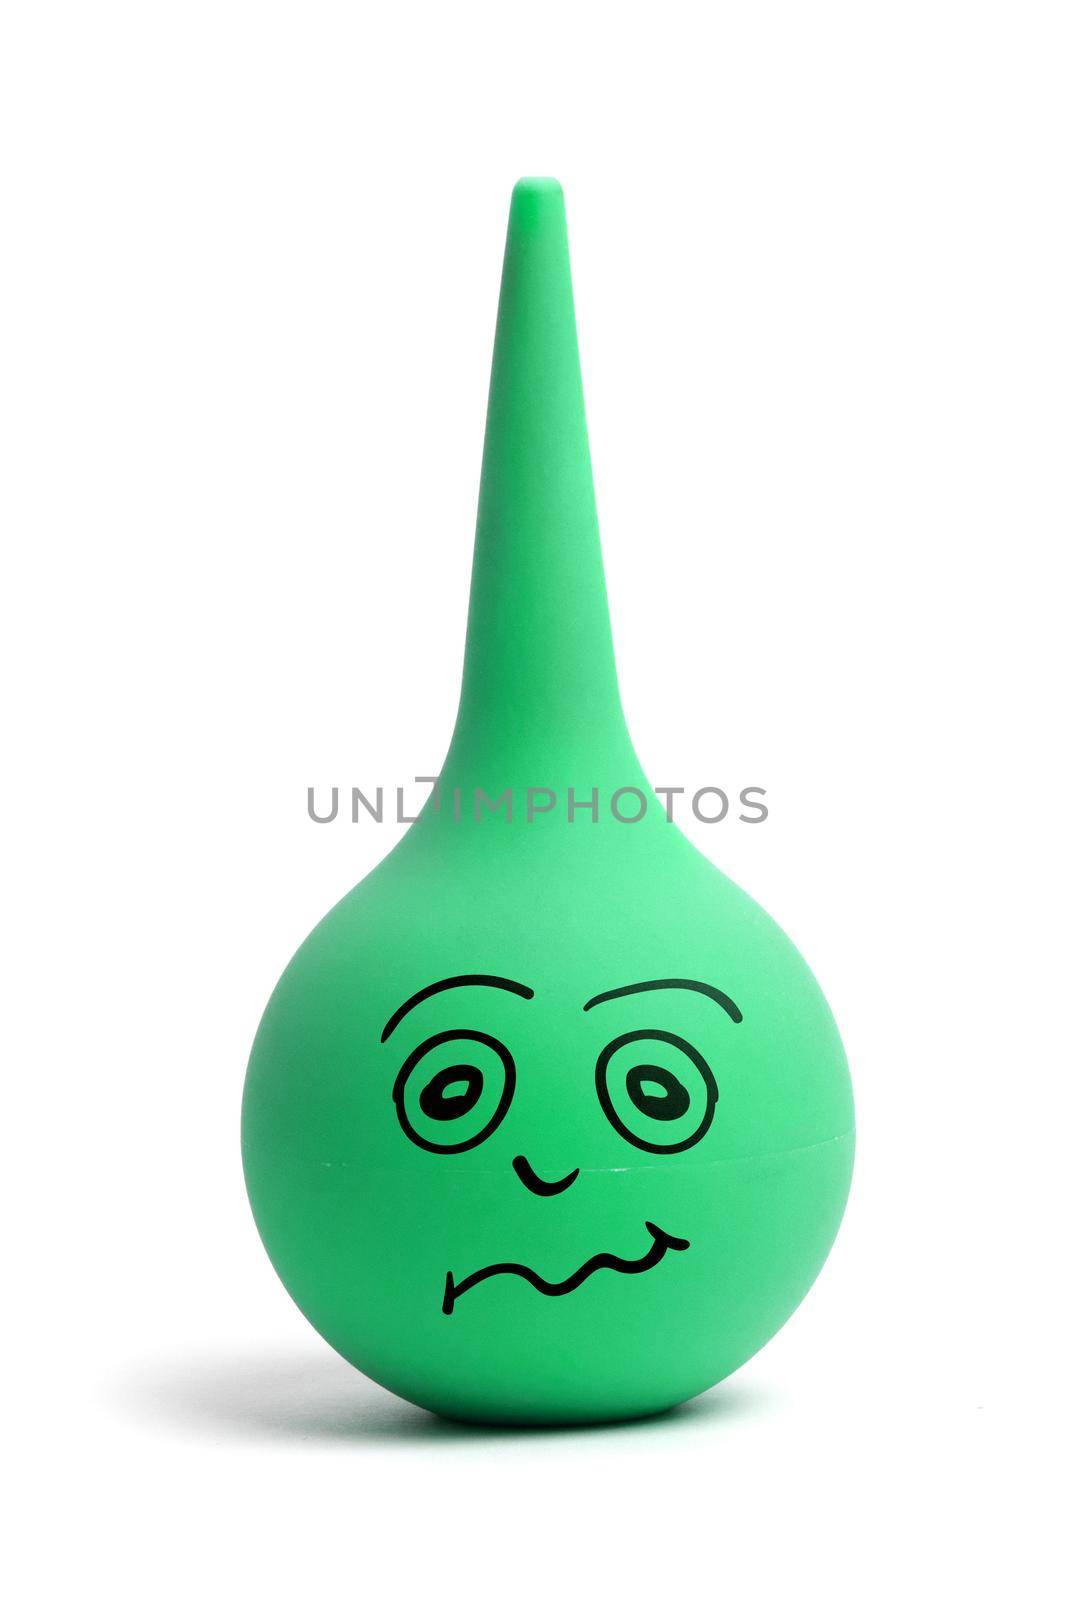 Funny green cartoon rubber enema with a confused, puzzled emotion isolated on white background